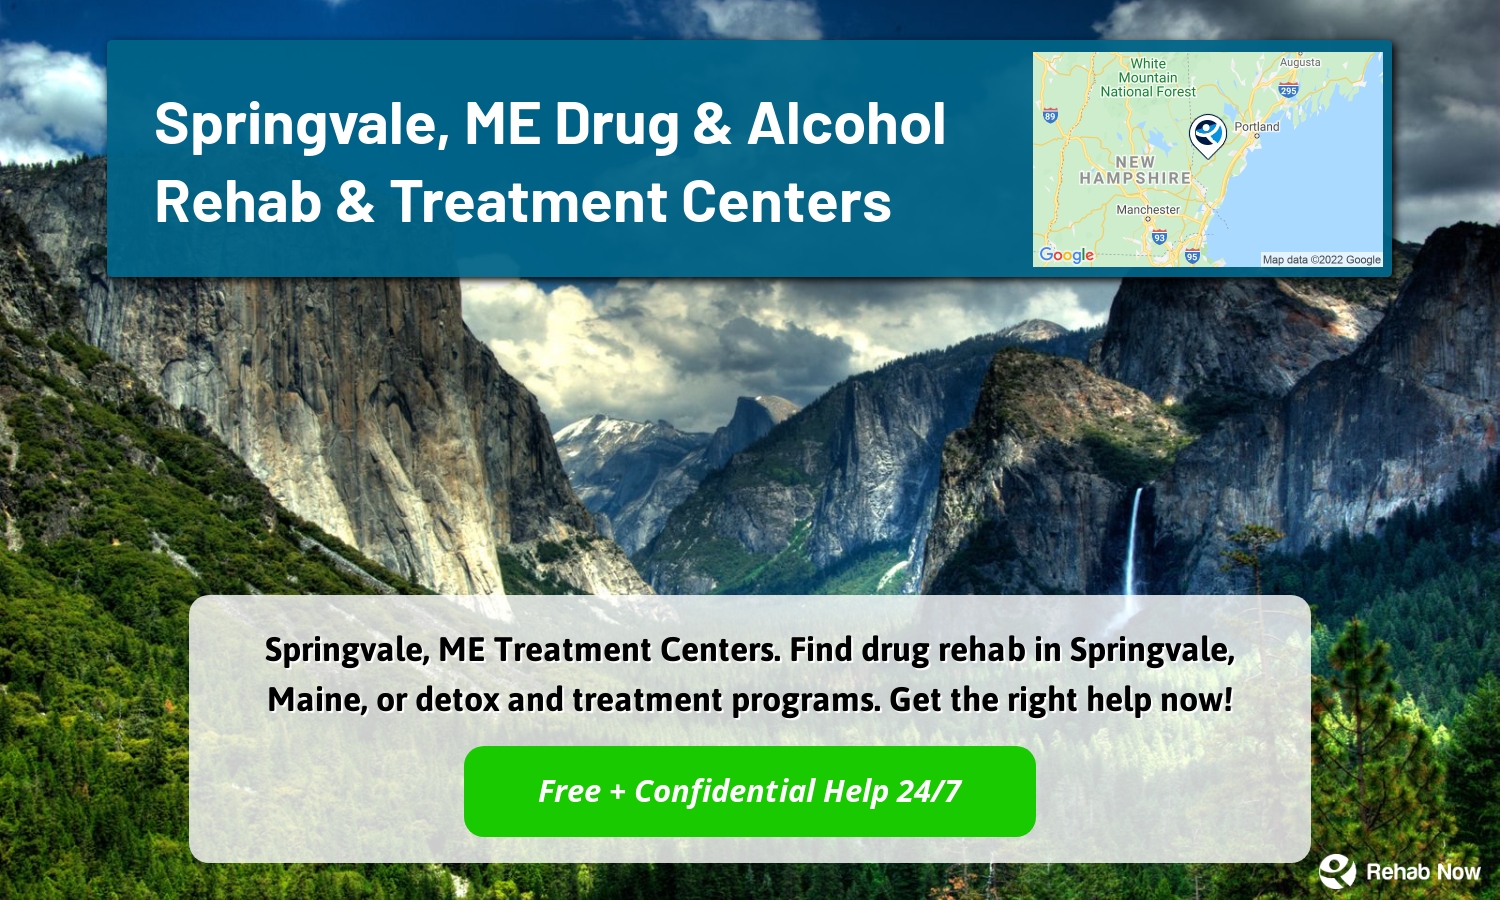 Springvale, ME Treatment Centers. Find drug rehab in Springvale, Maine, or detox and treatment programs. Get the right help now!